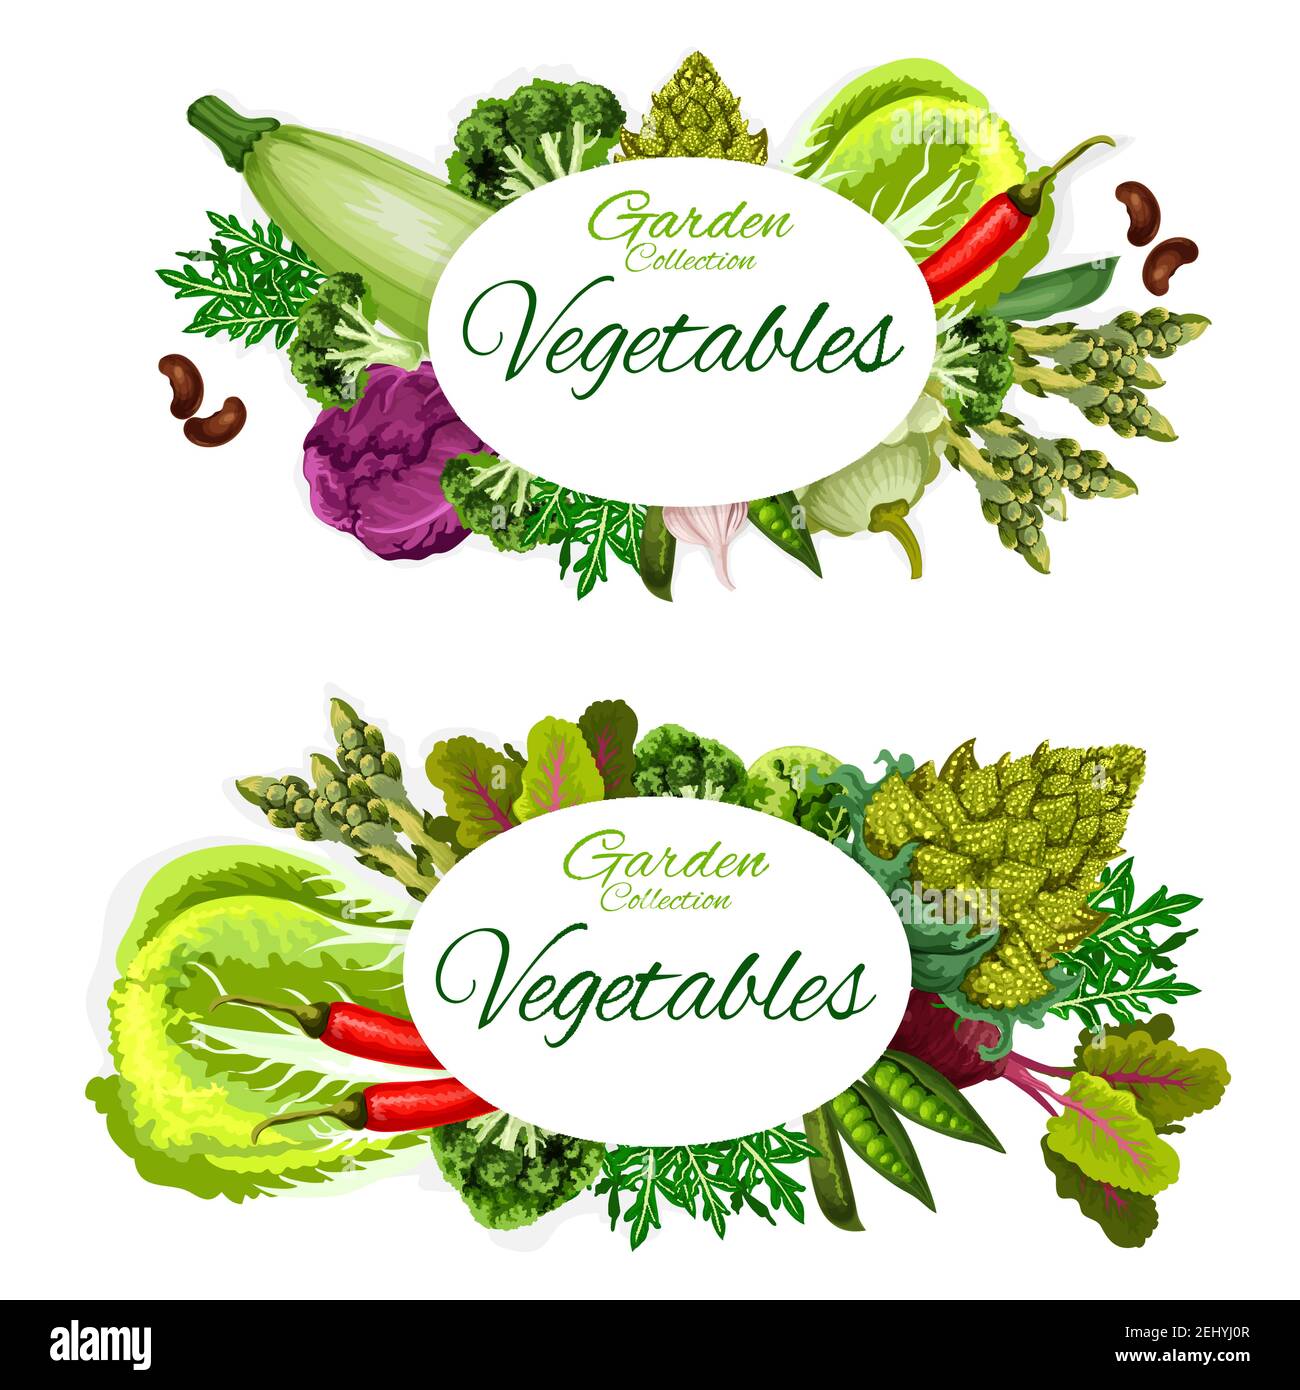 Vegetable, beans and culinary herbs vector posters of organic farm veggies. Chili pepper, broccoli and cabbage, garlic, pea and zucchini, asparagus, s Stock Vector